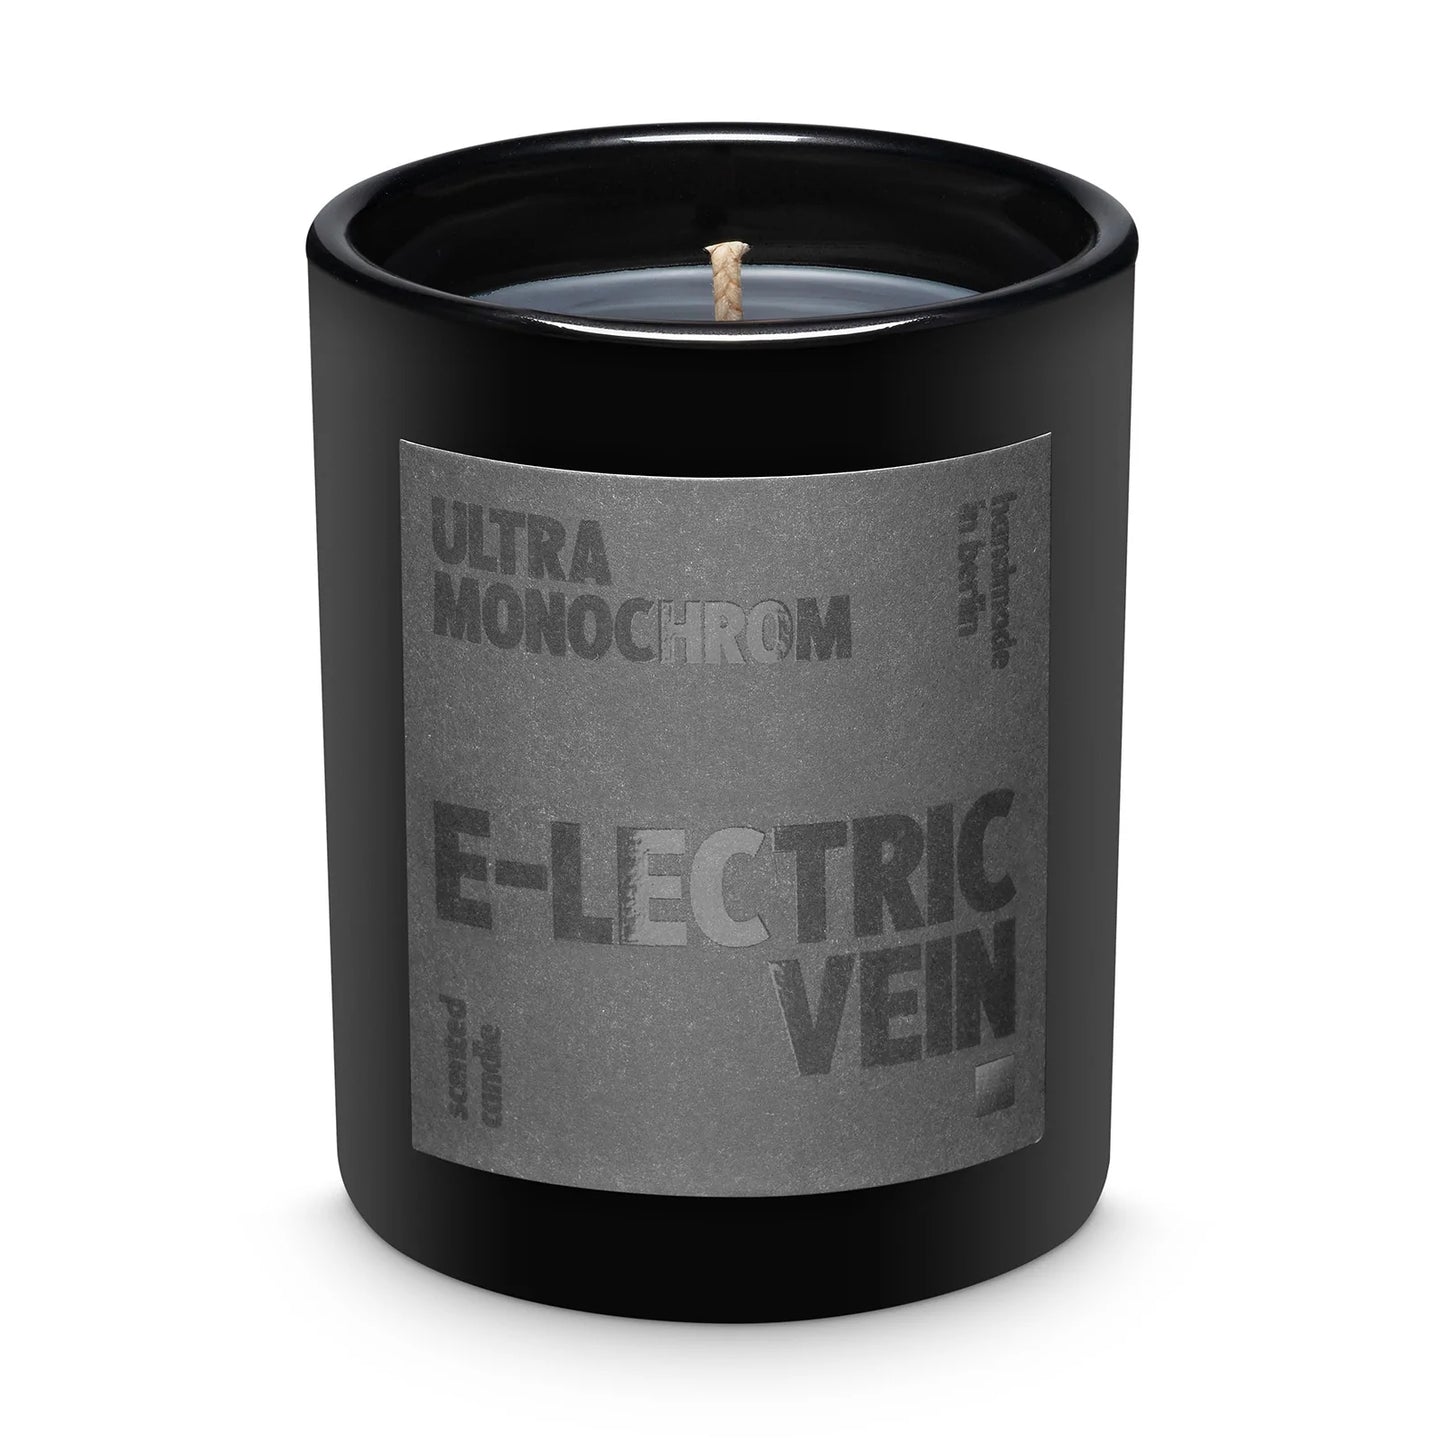 Ultramonochrom e-lectric vein scented soy candle.